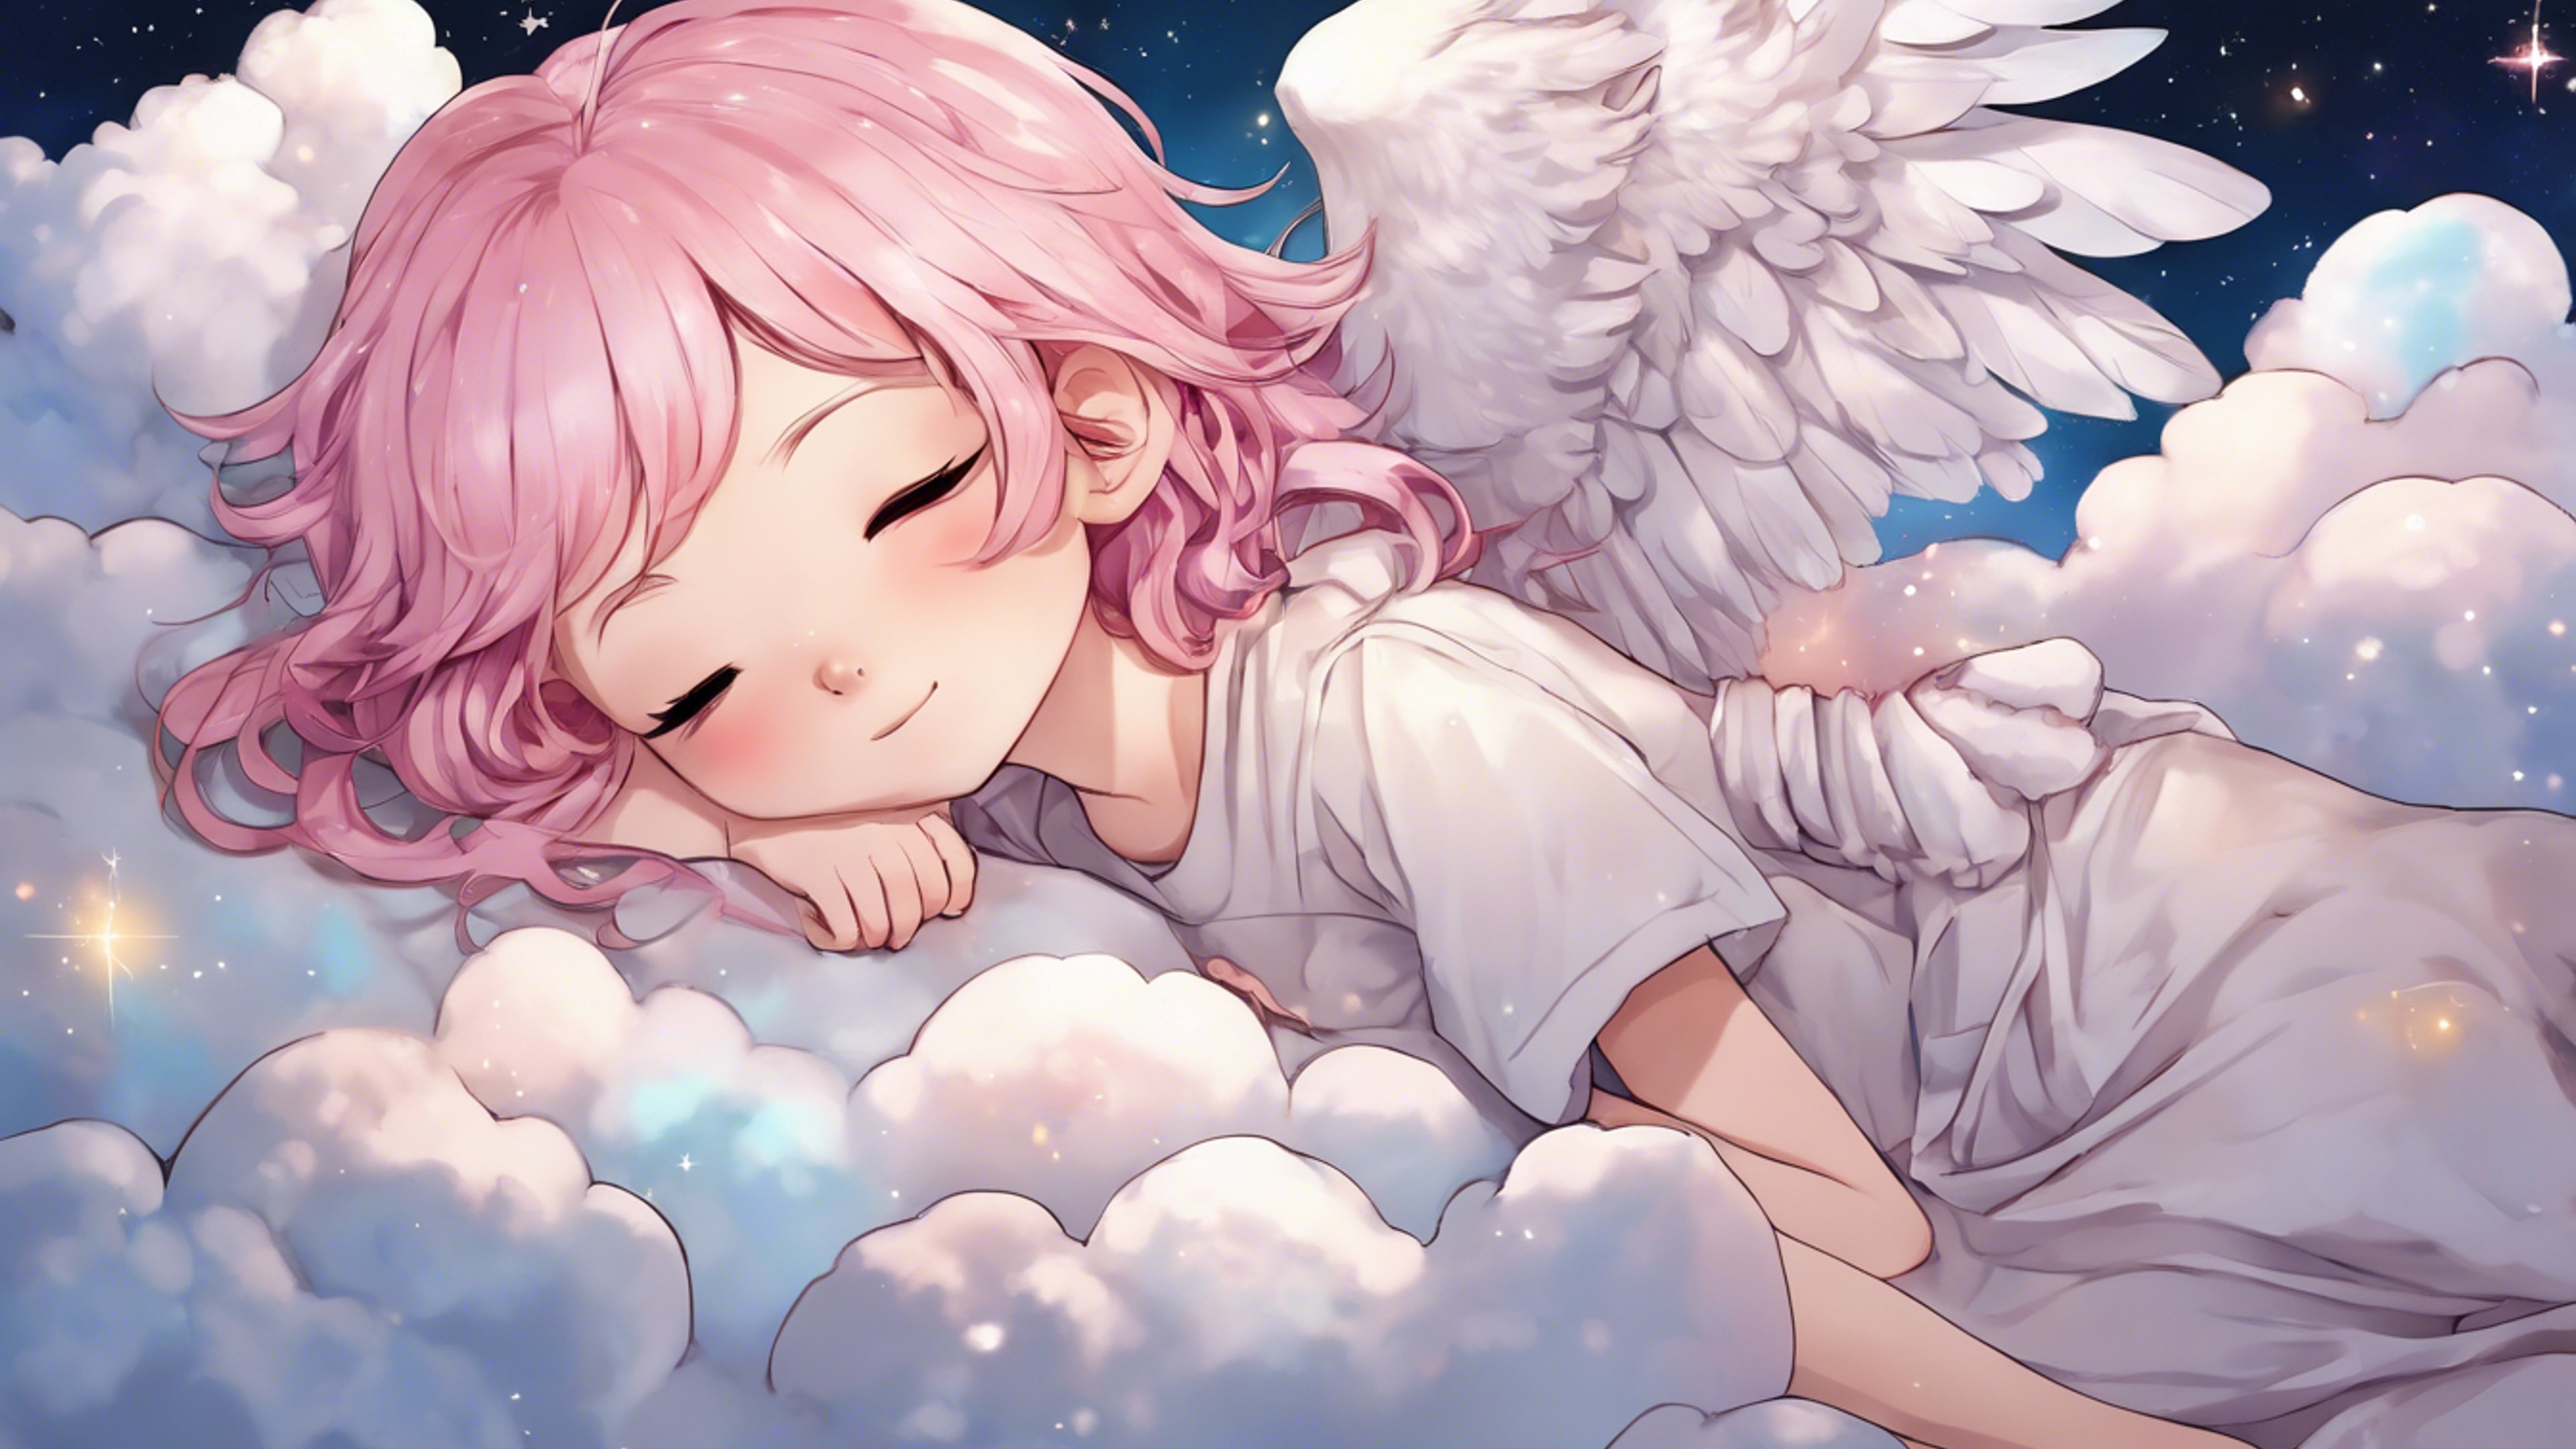 A chibi-style anime girl with pastel pink hair and angel wings, sleeping peacefully on a fluffy cloud under a starry night sky. Sfondo[4a6f35b80bd74bd2872d]